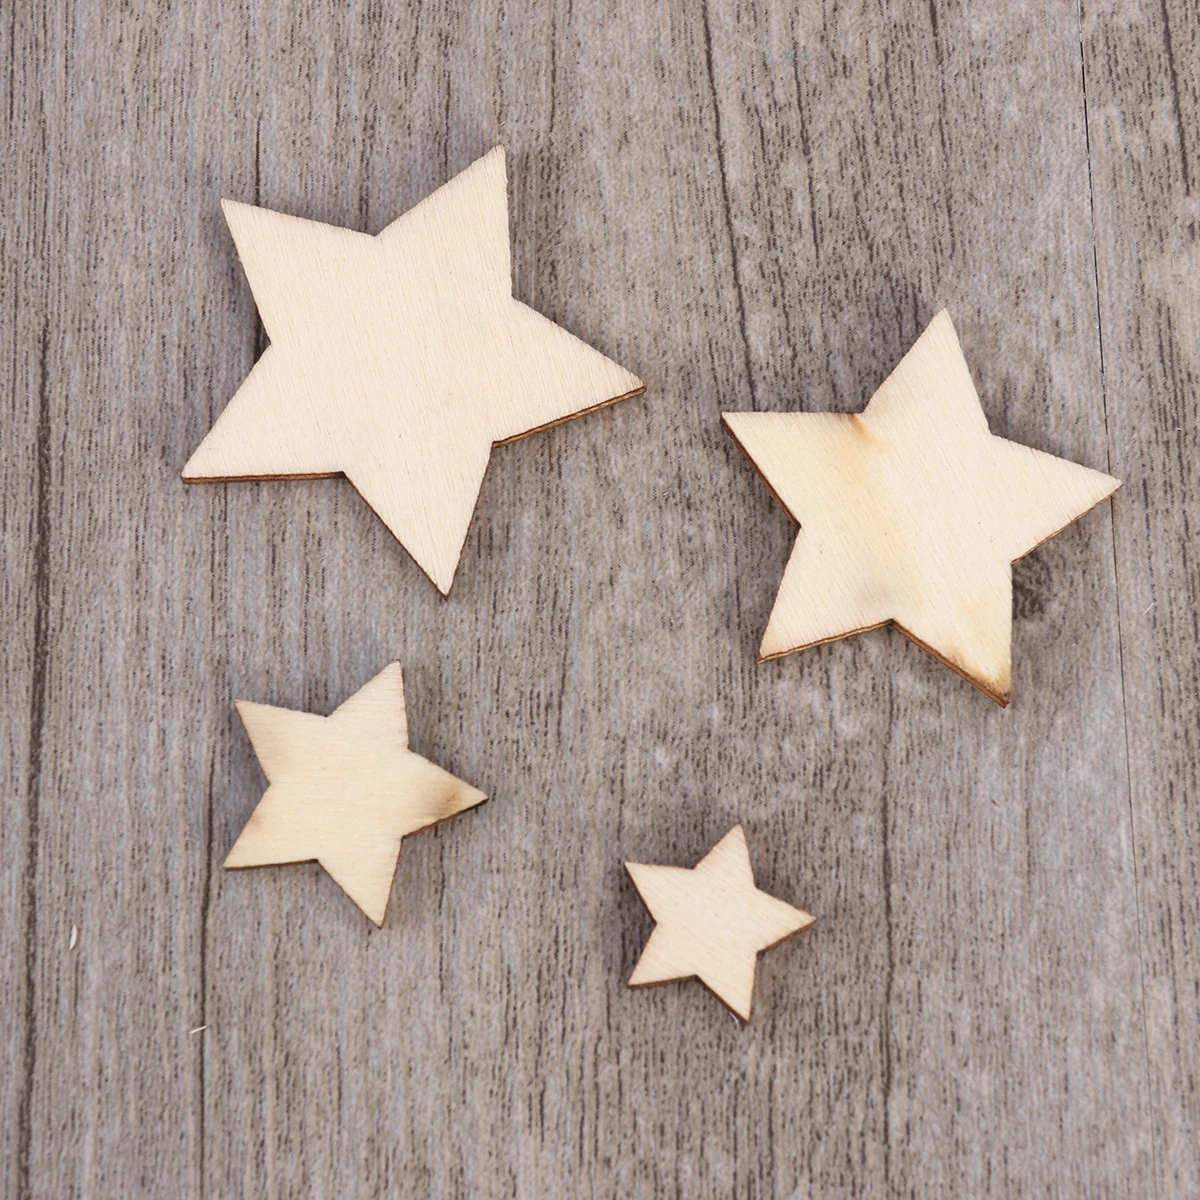 100PCS Unfinished Wooden Stars Assorted Size Cutout Discs For Arts Crafts DIY Decoration Birthday Wedding Display Decor